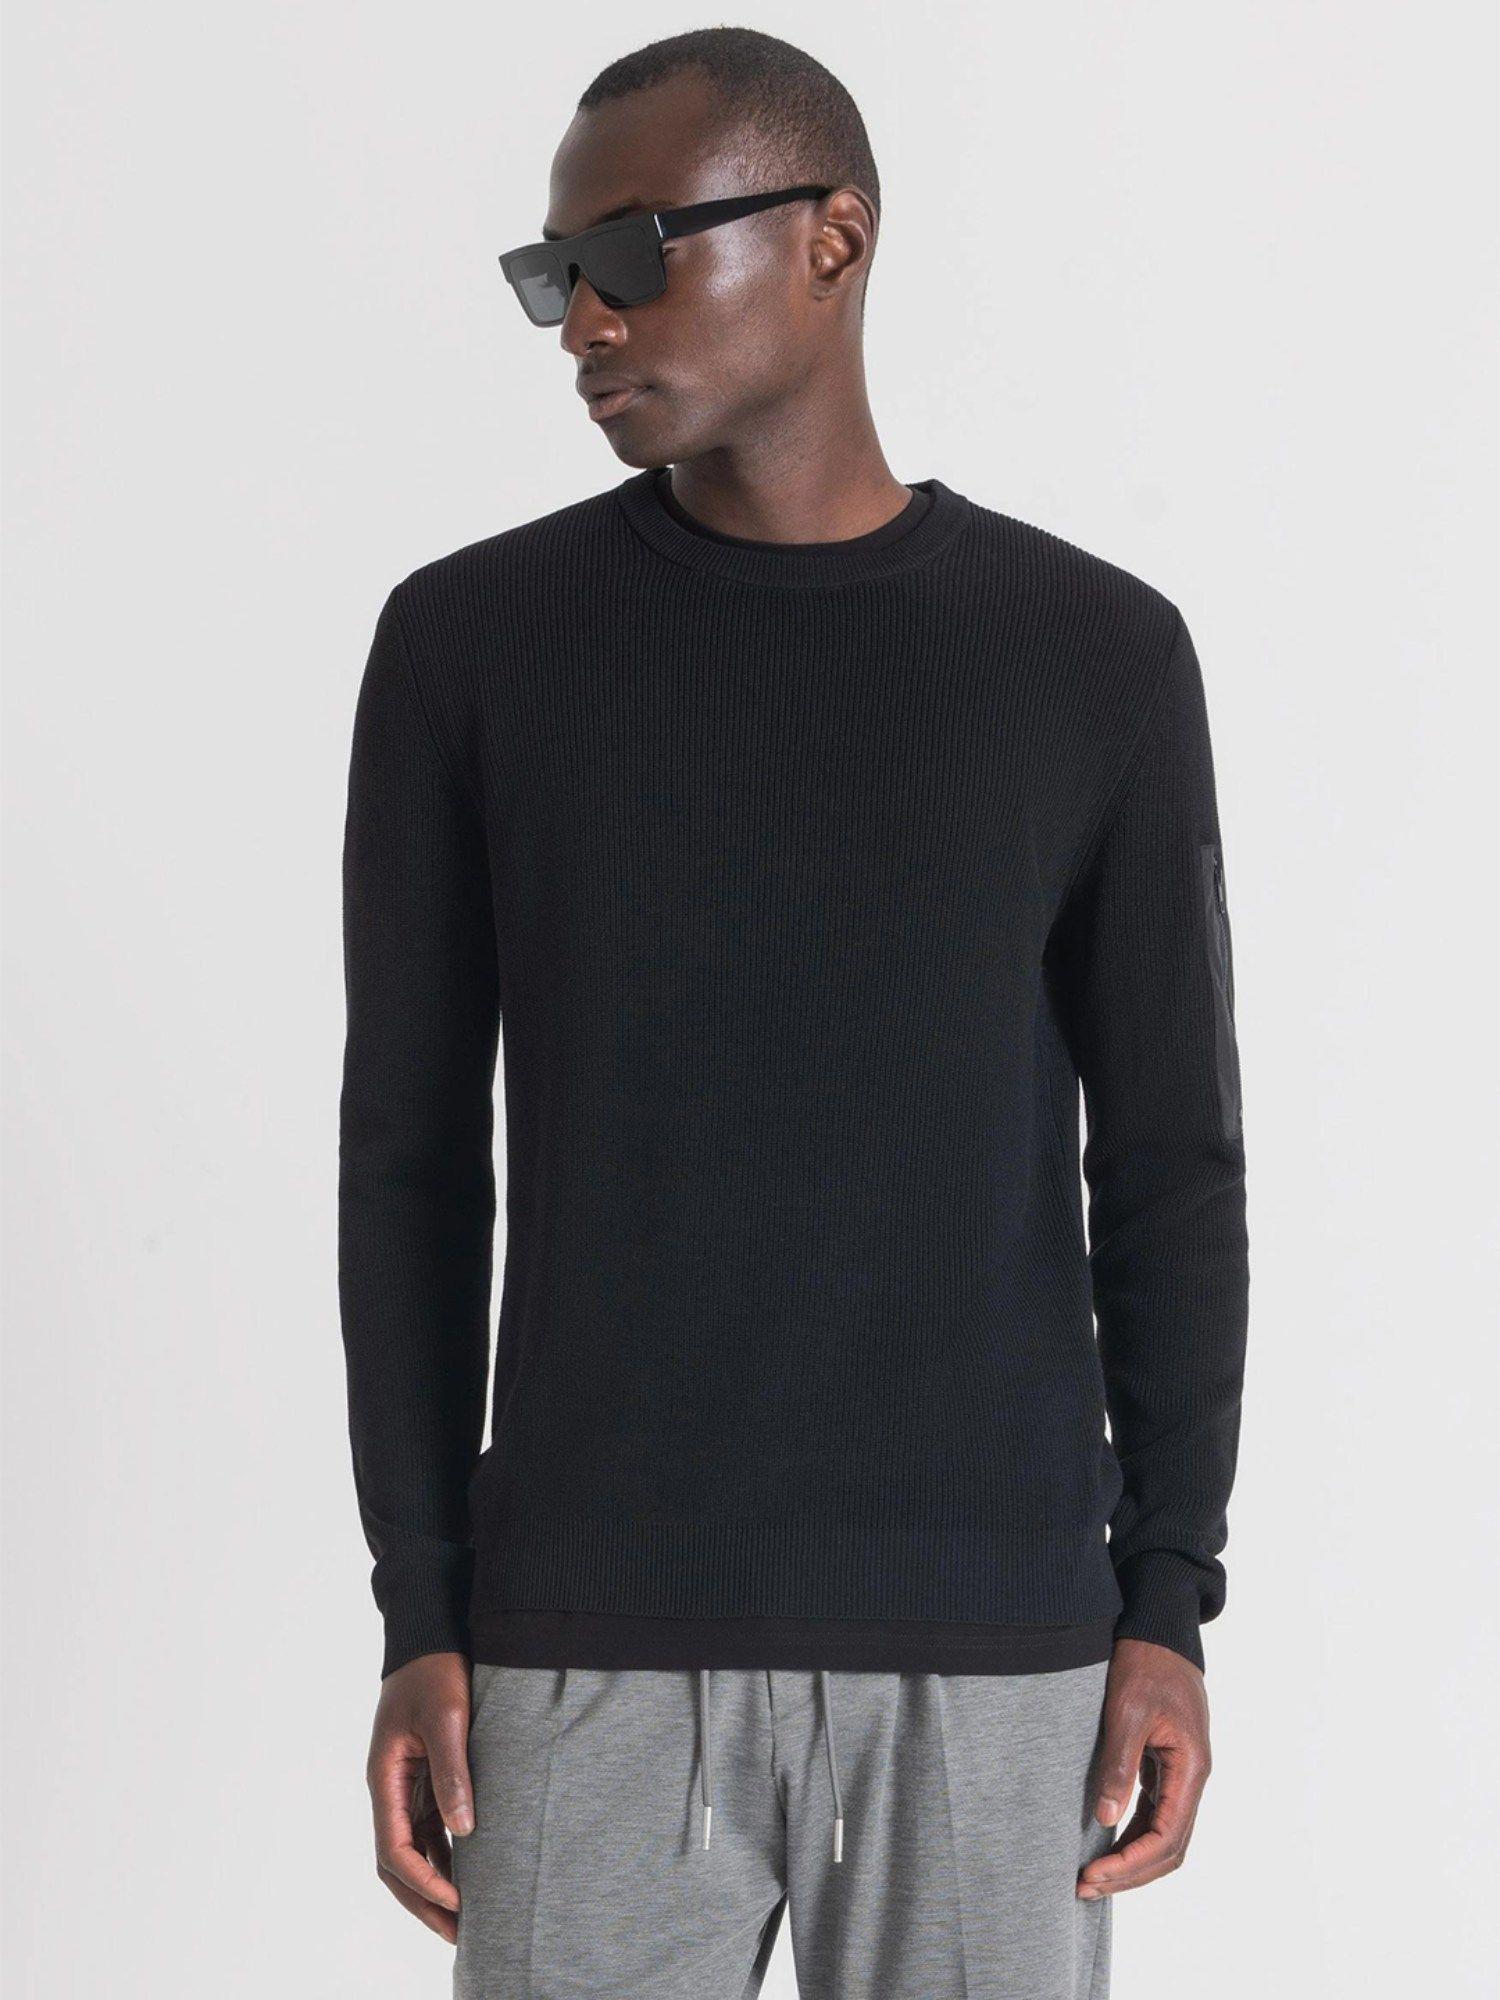 sweater slim fit in cotton viscose blend yarn with pocket polyester fabric